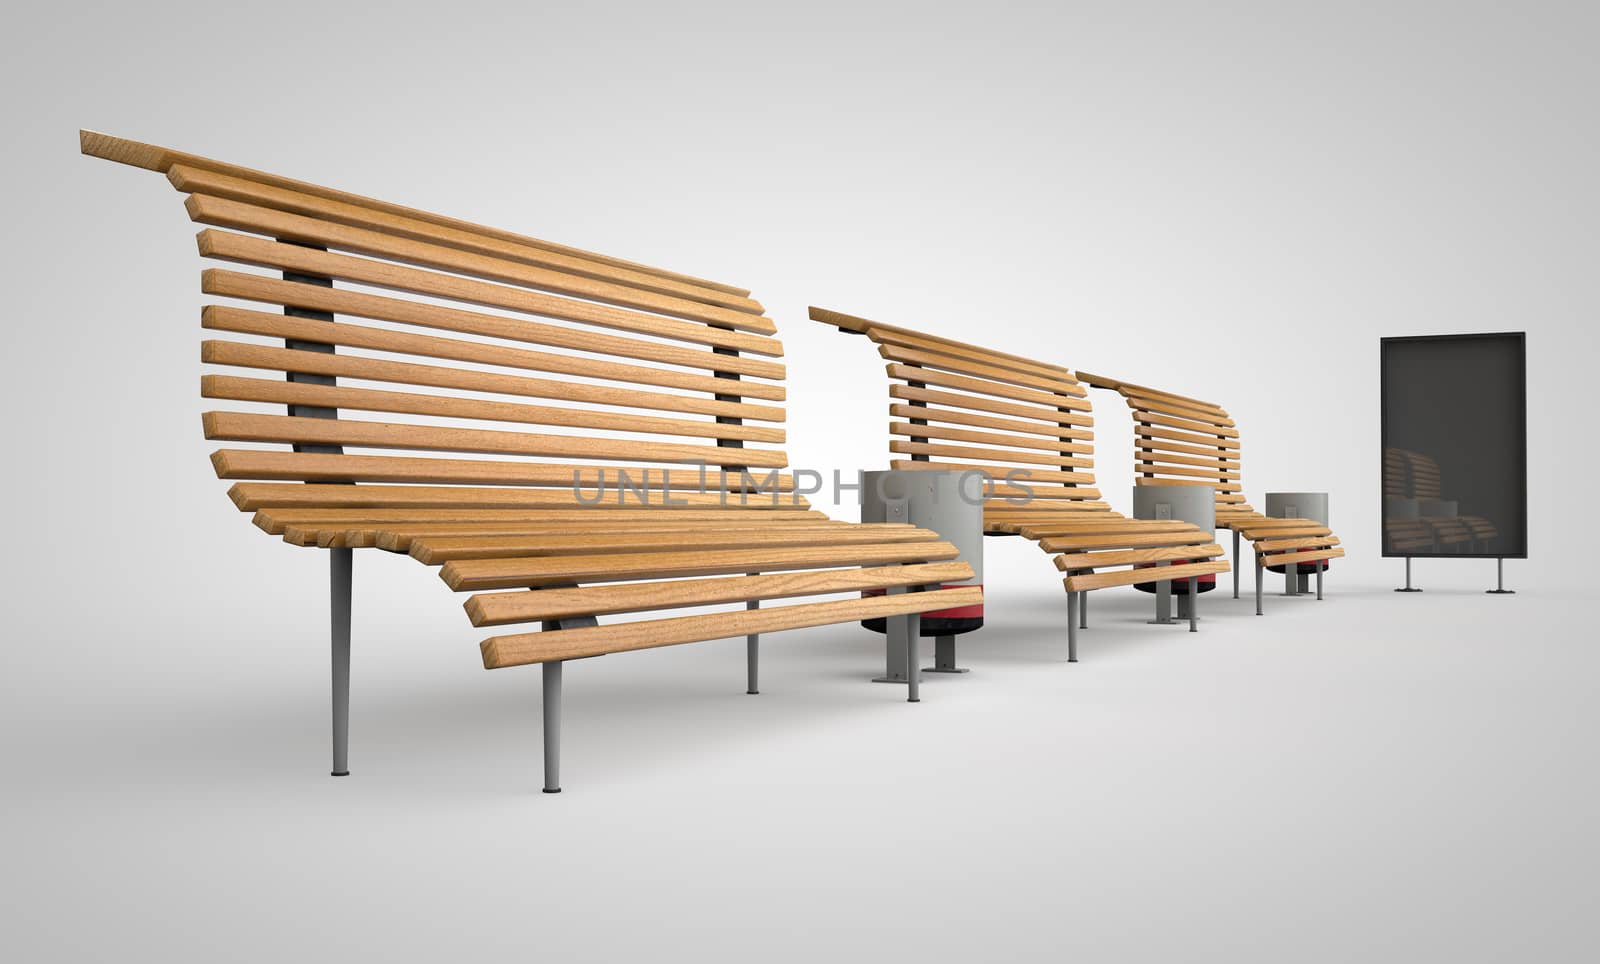 Three benches stretching into perspective with billboard